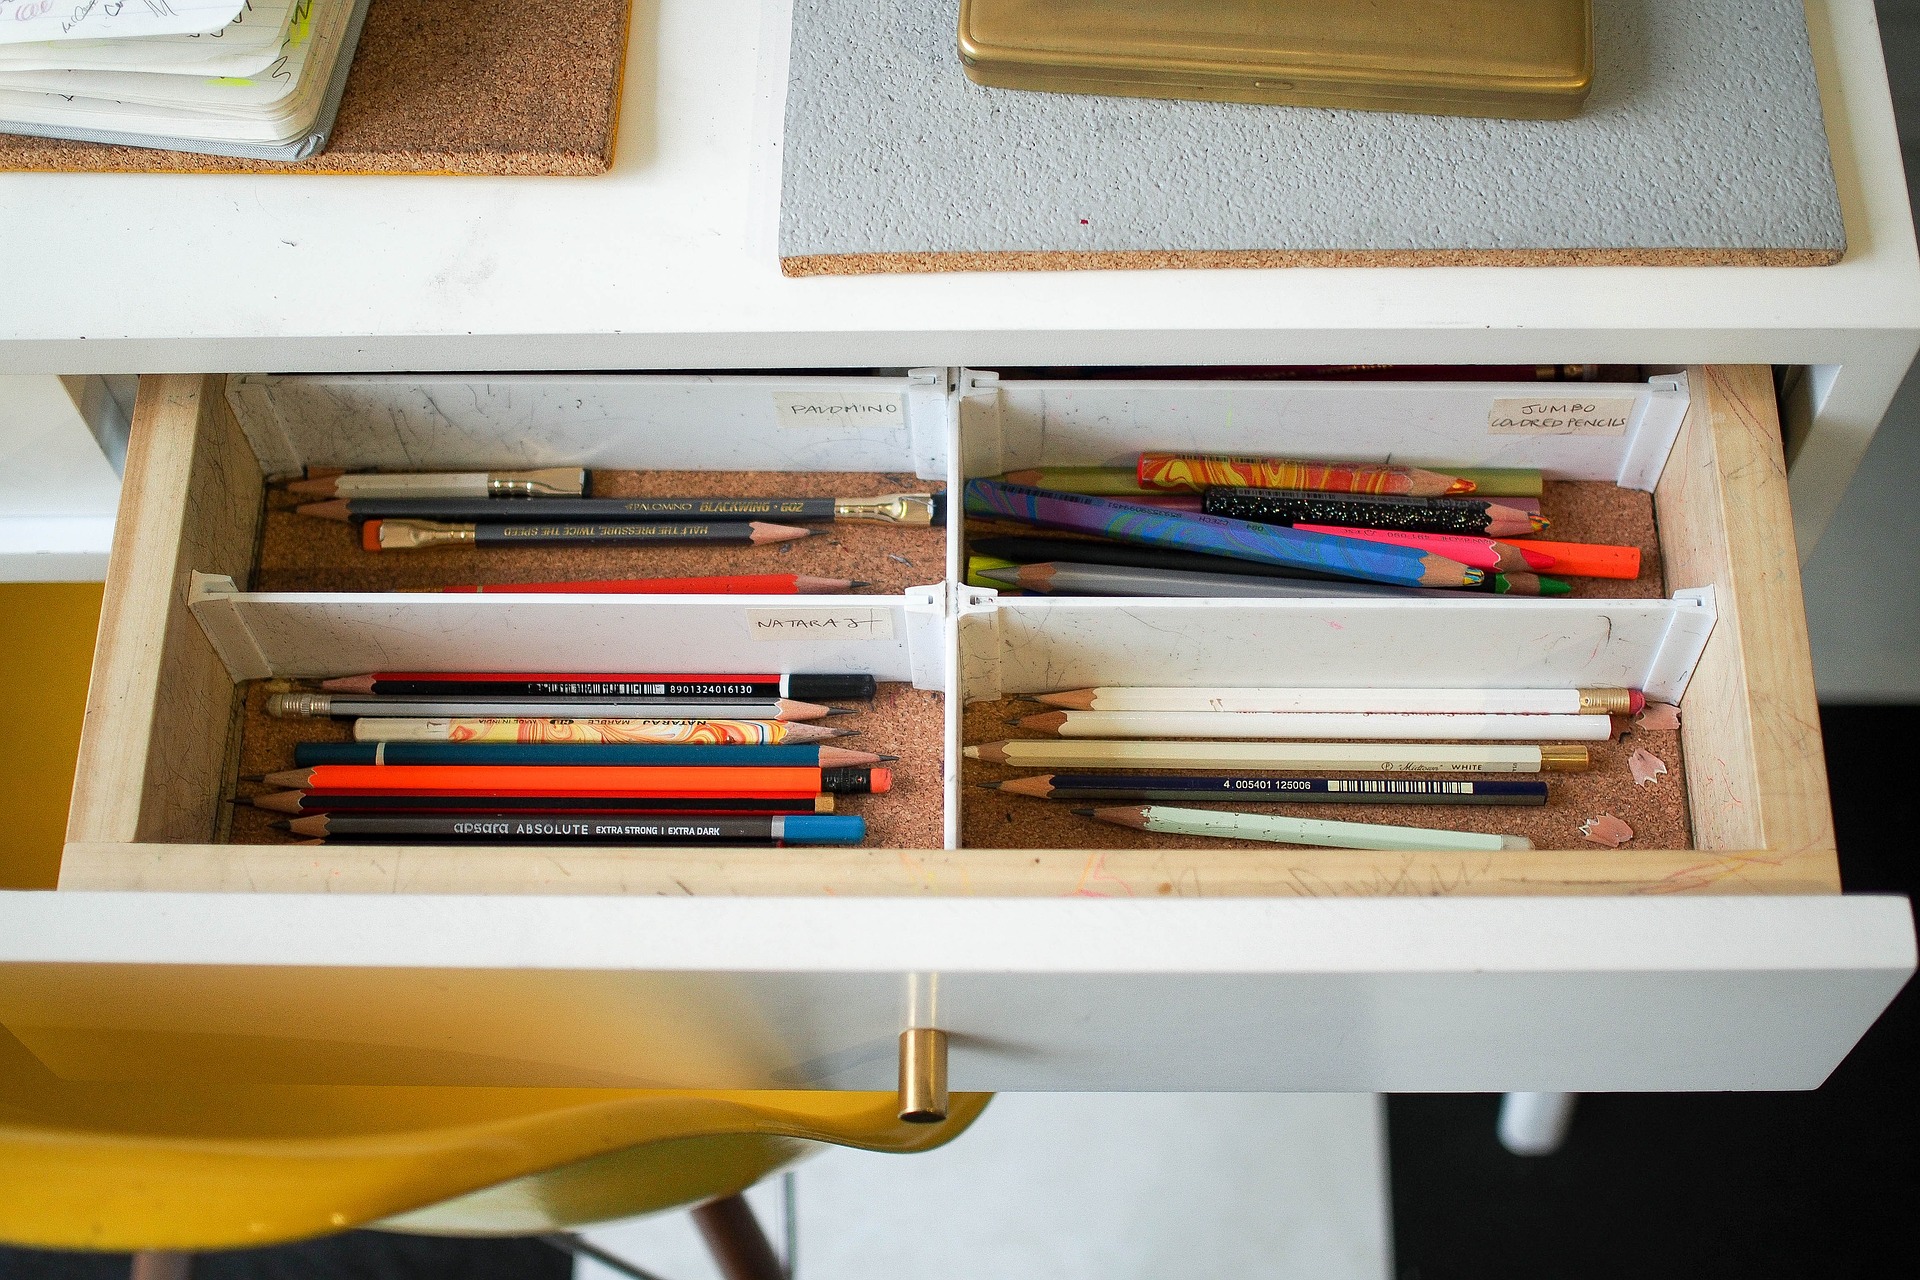 Organize and store your items in drawers